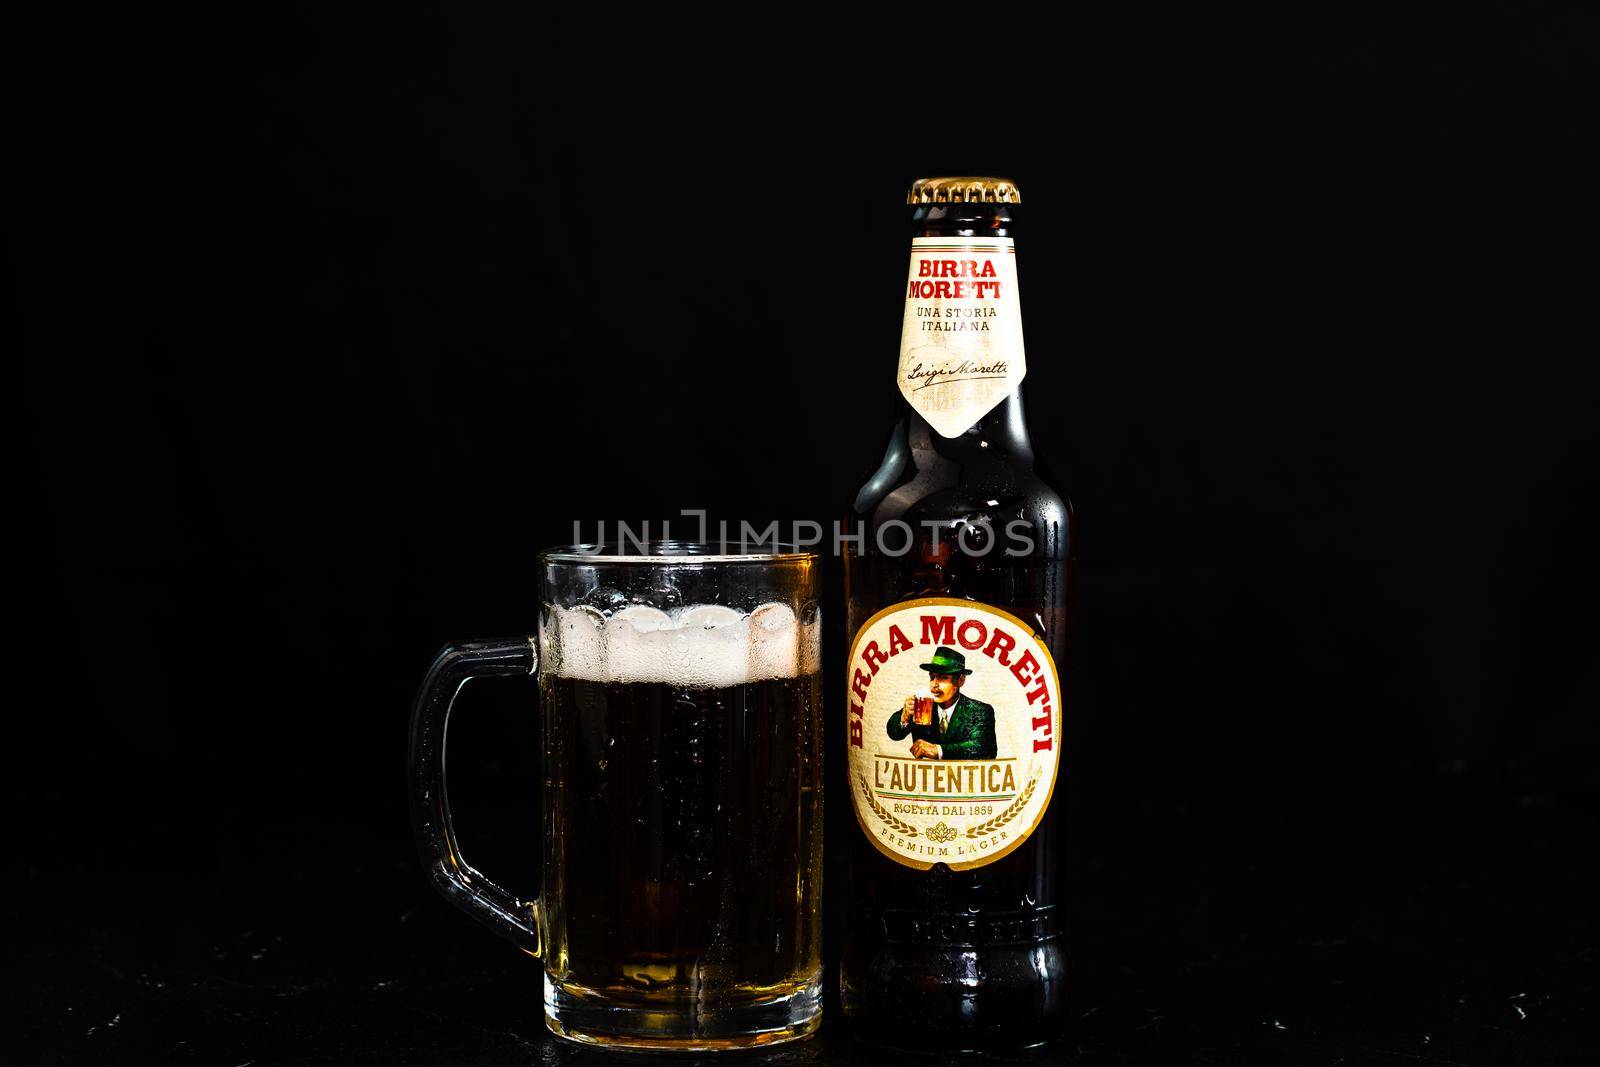 Can of Birra Morreti beer and beer glass on dark background. Illustrative editorial photo shot in Bucharest, Romania, 2021 by vladispas